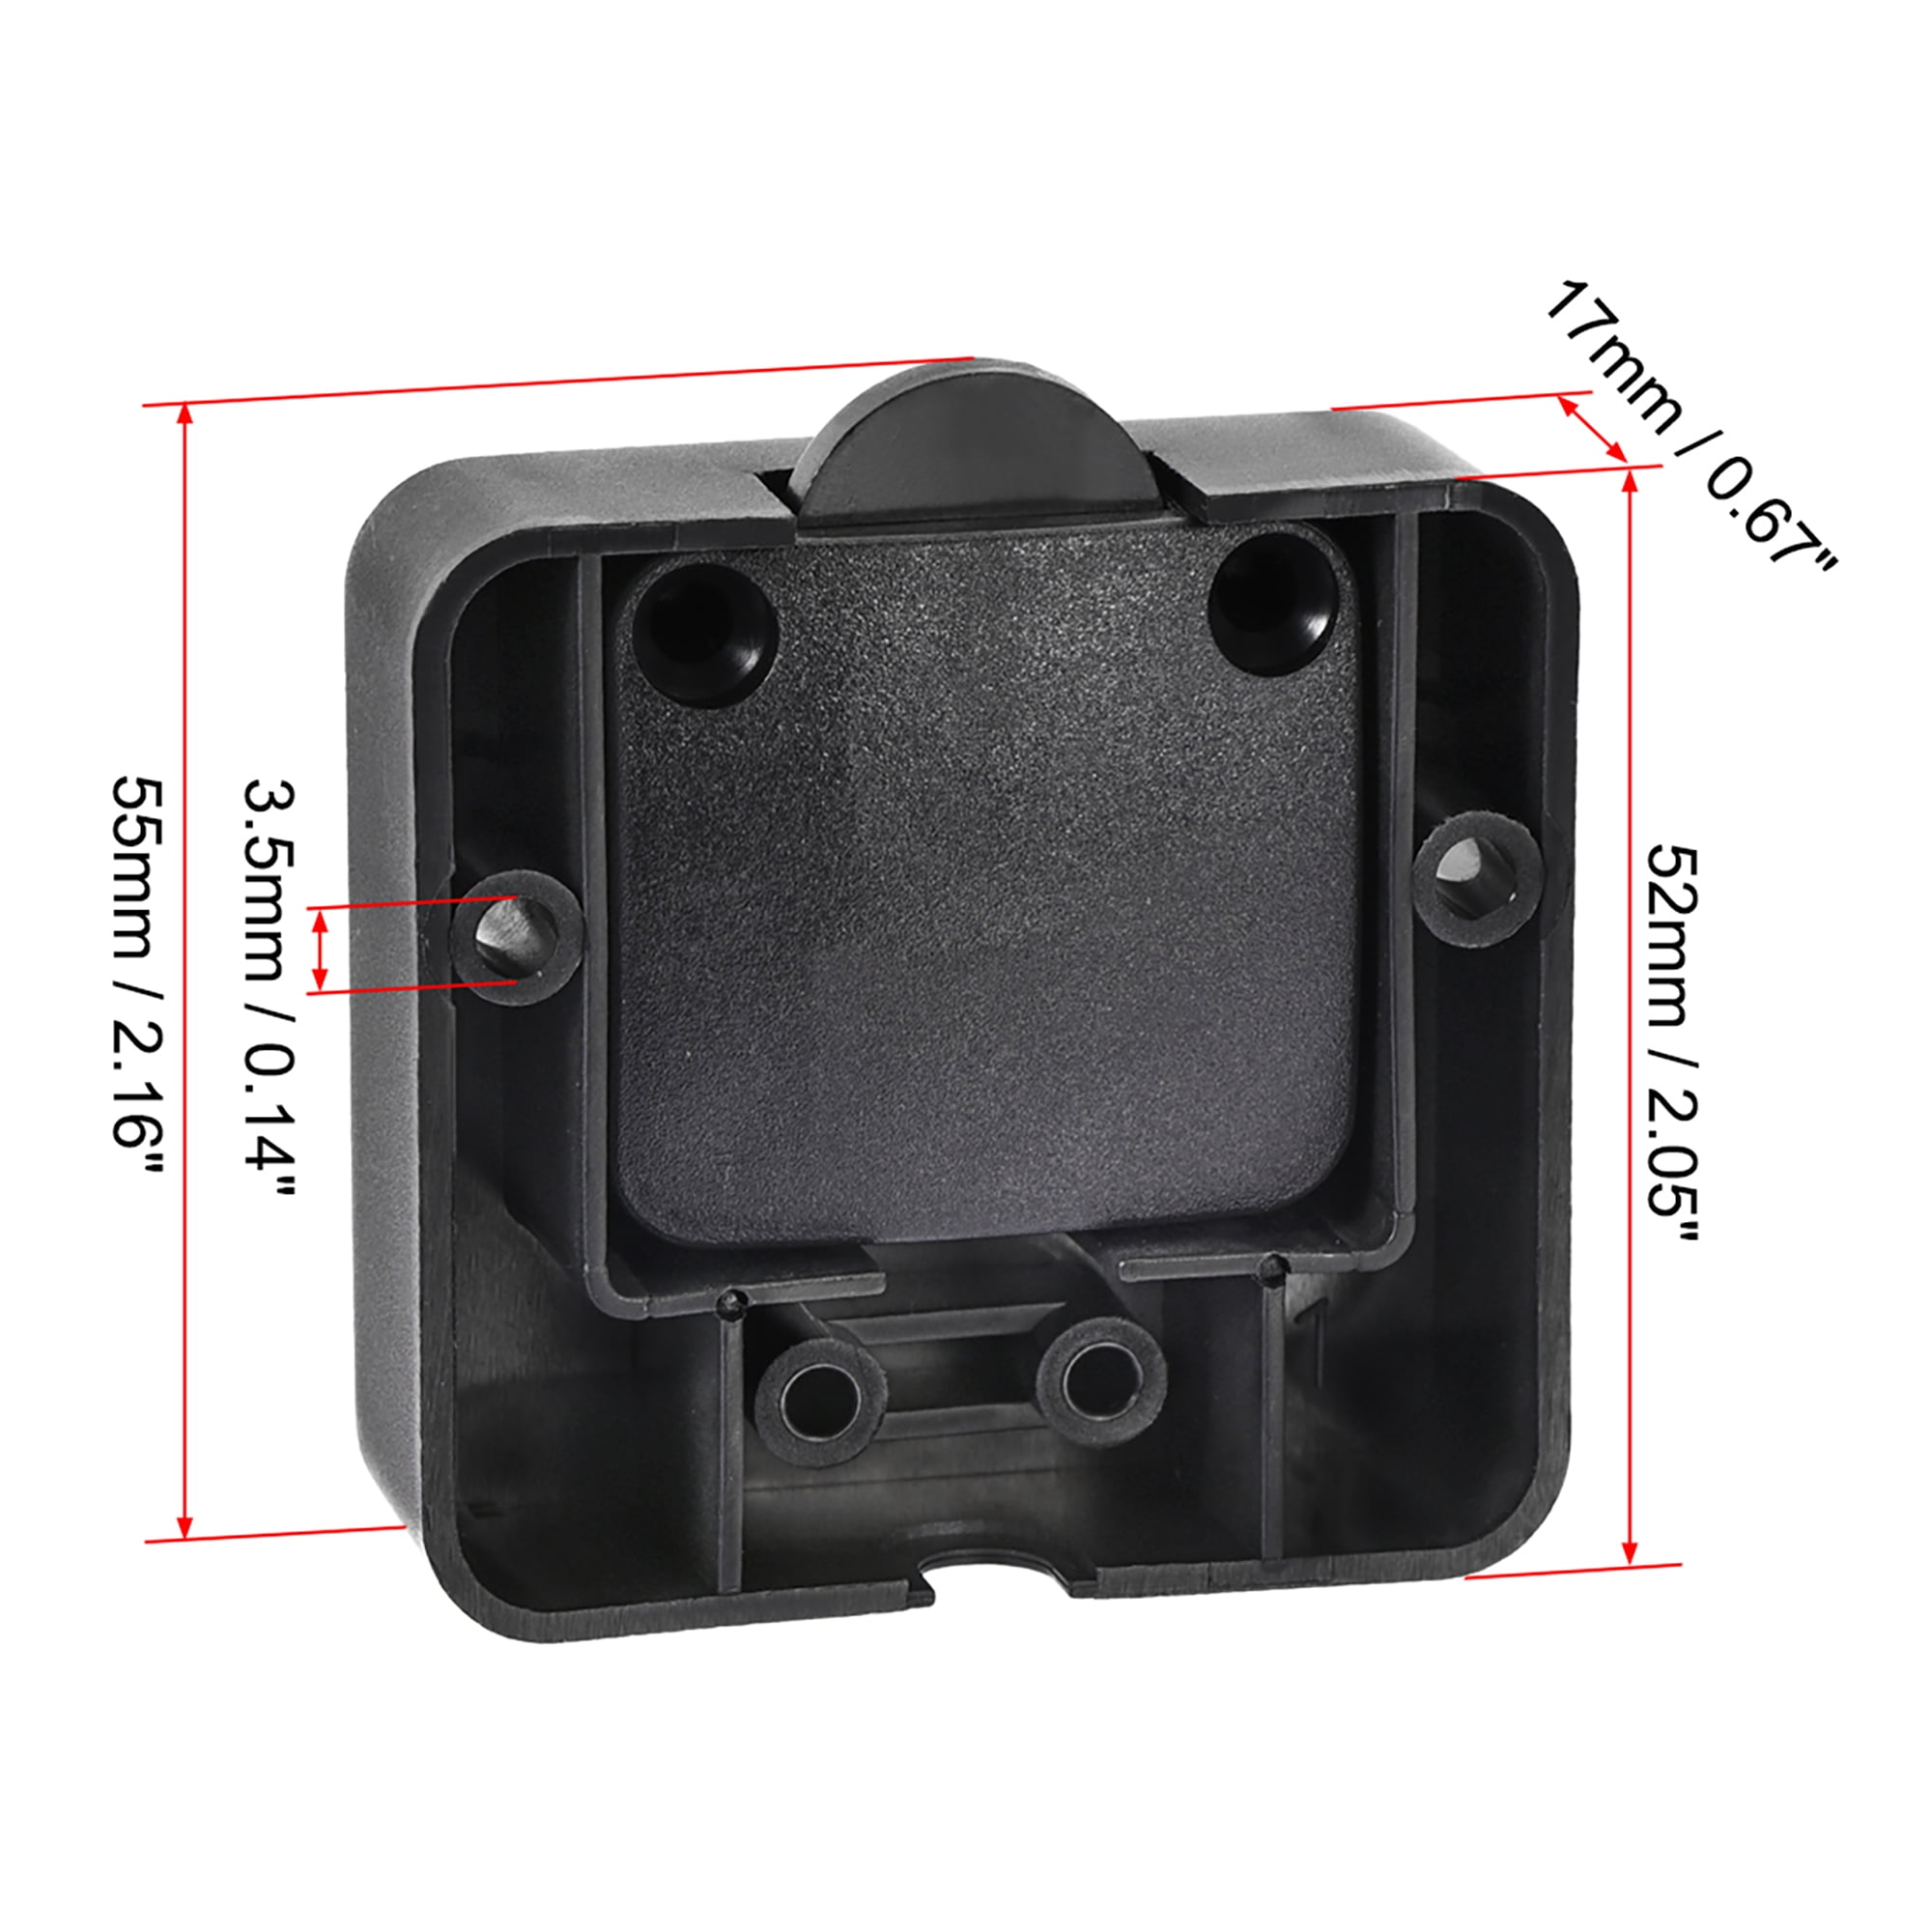 Details about   Wardrobe Door Light Switch Momentary Normally Closed 110-250V 2A Black 2 Pcs 